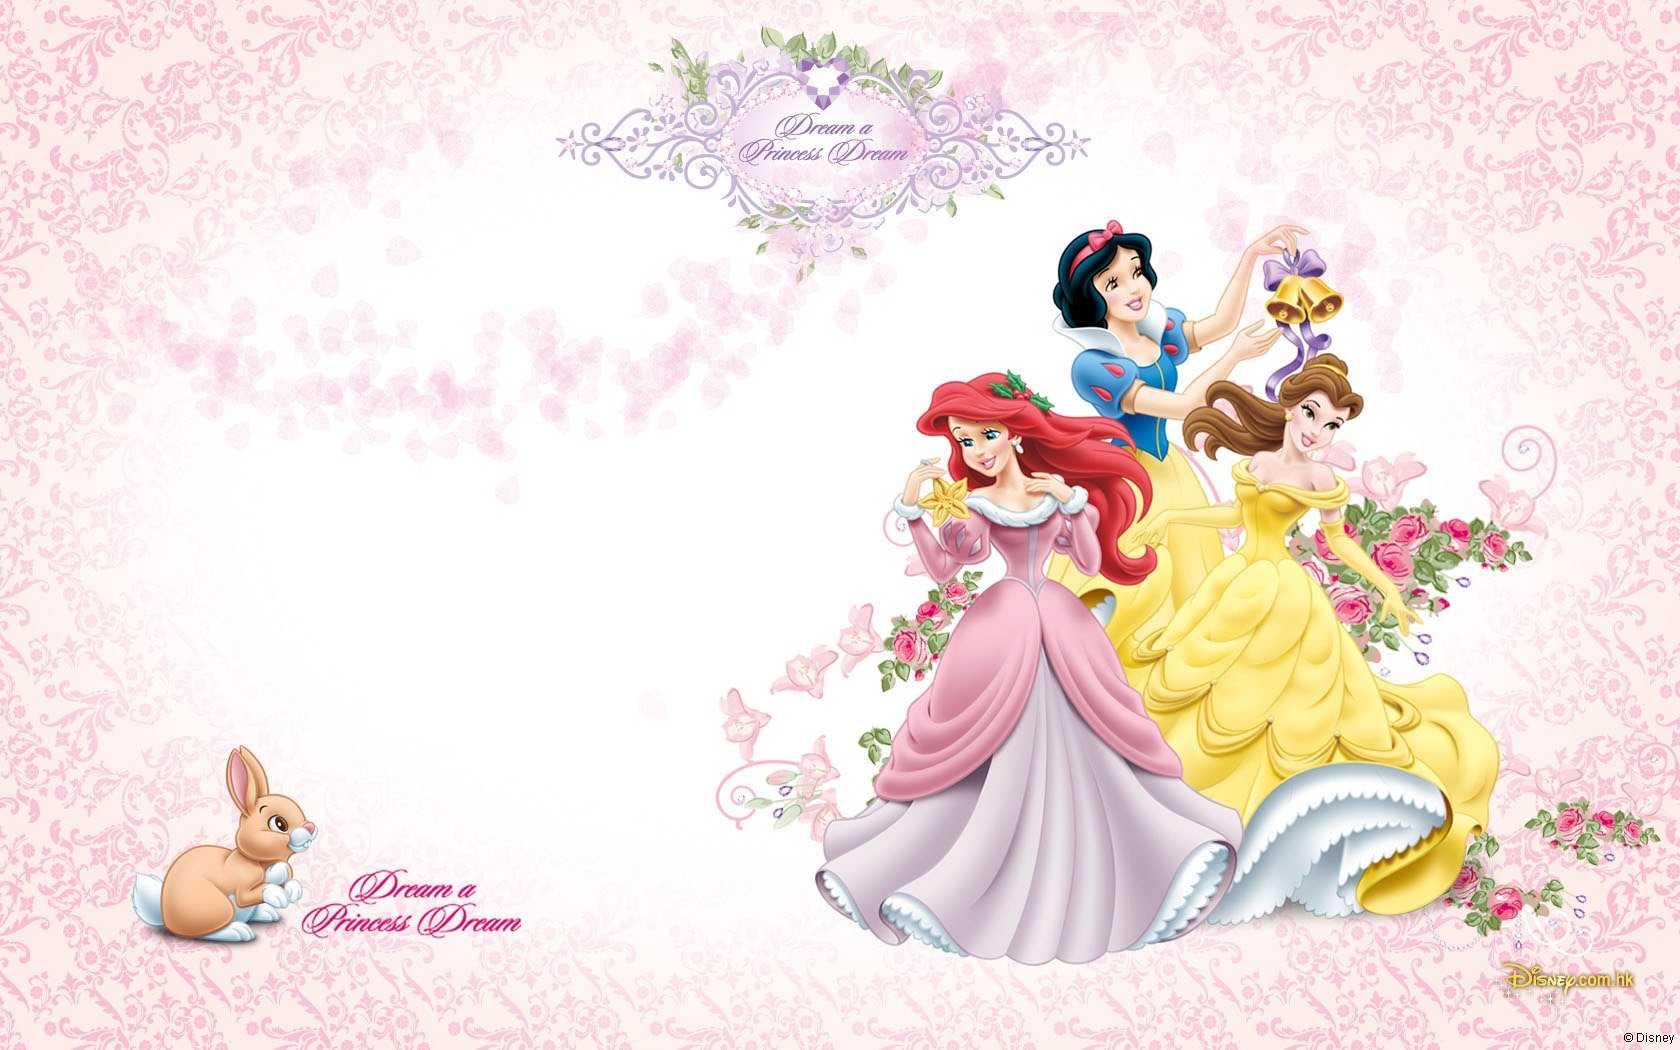 Disney Princess Wallpaper 18 Wallpaper Background Hd With Resolutions 1680x1050